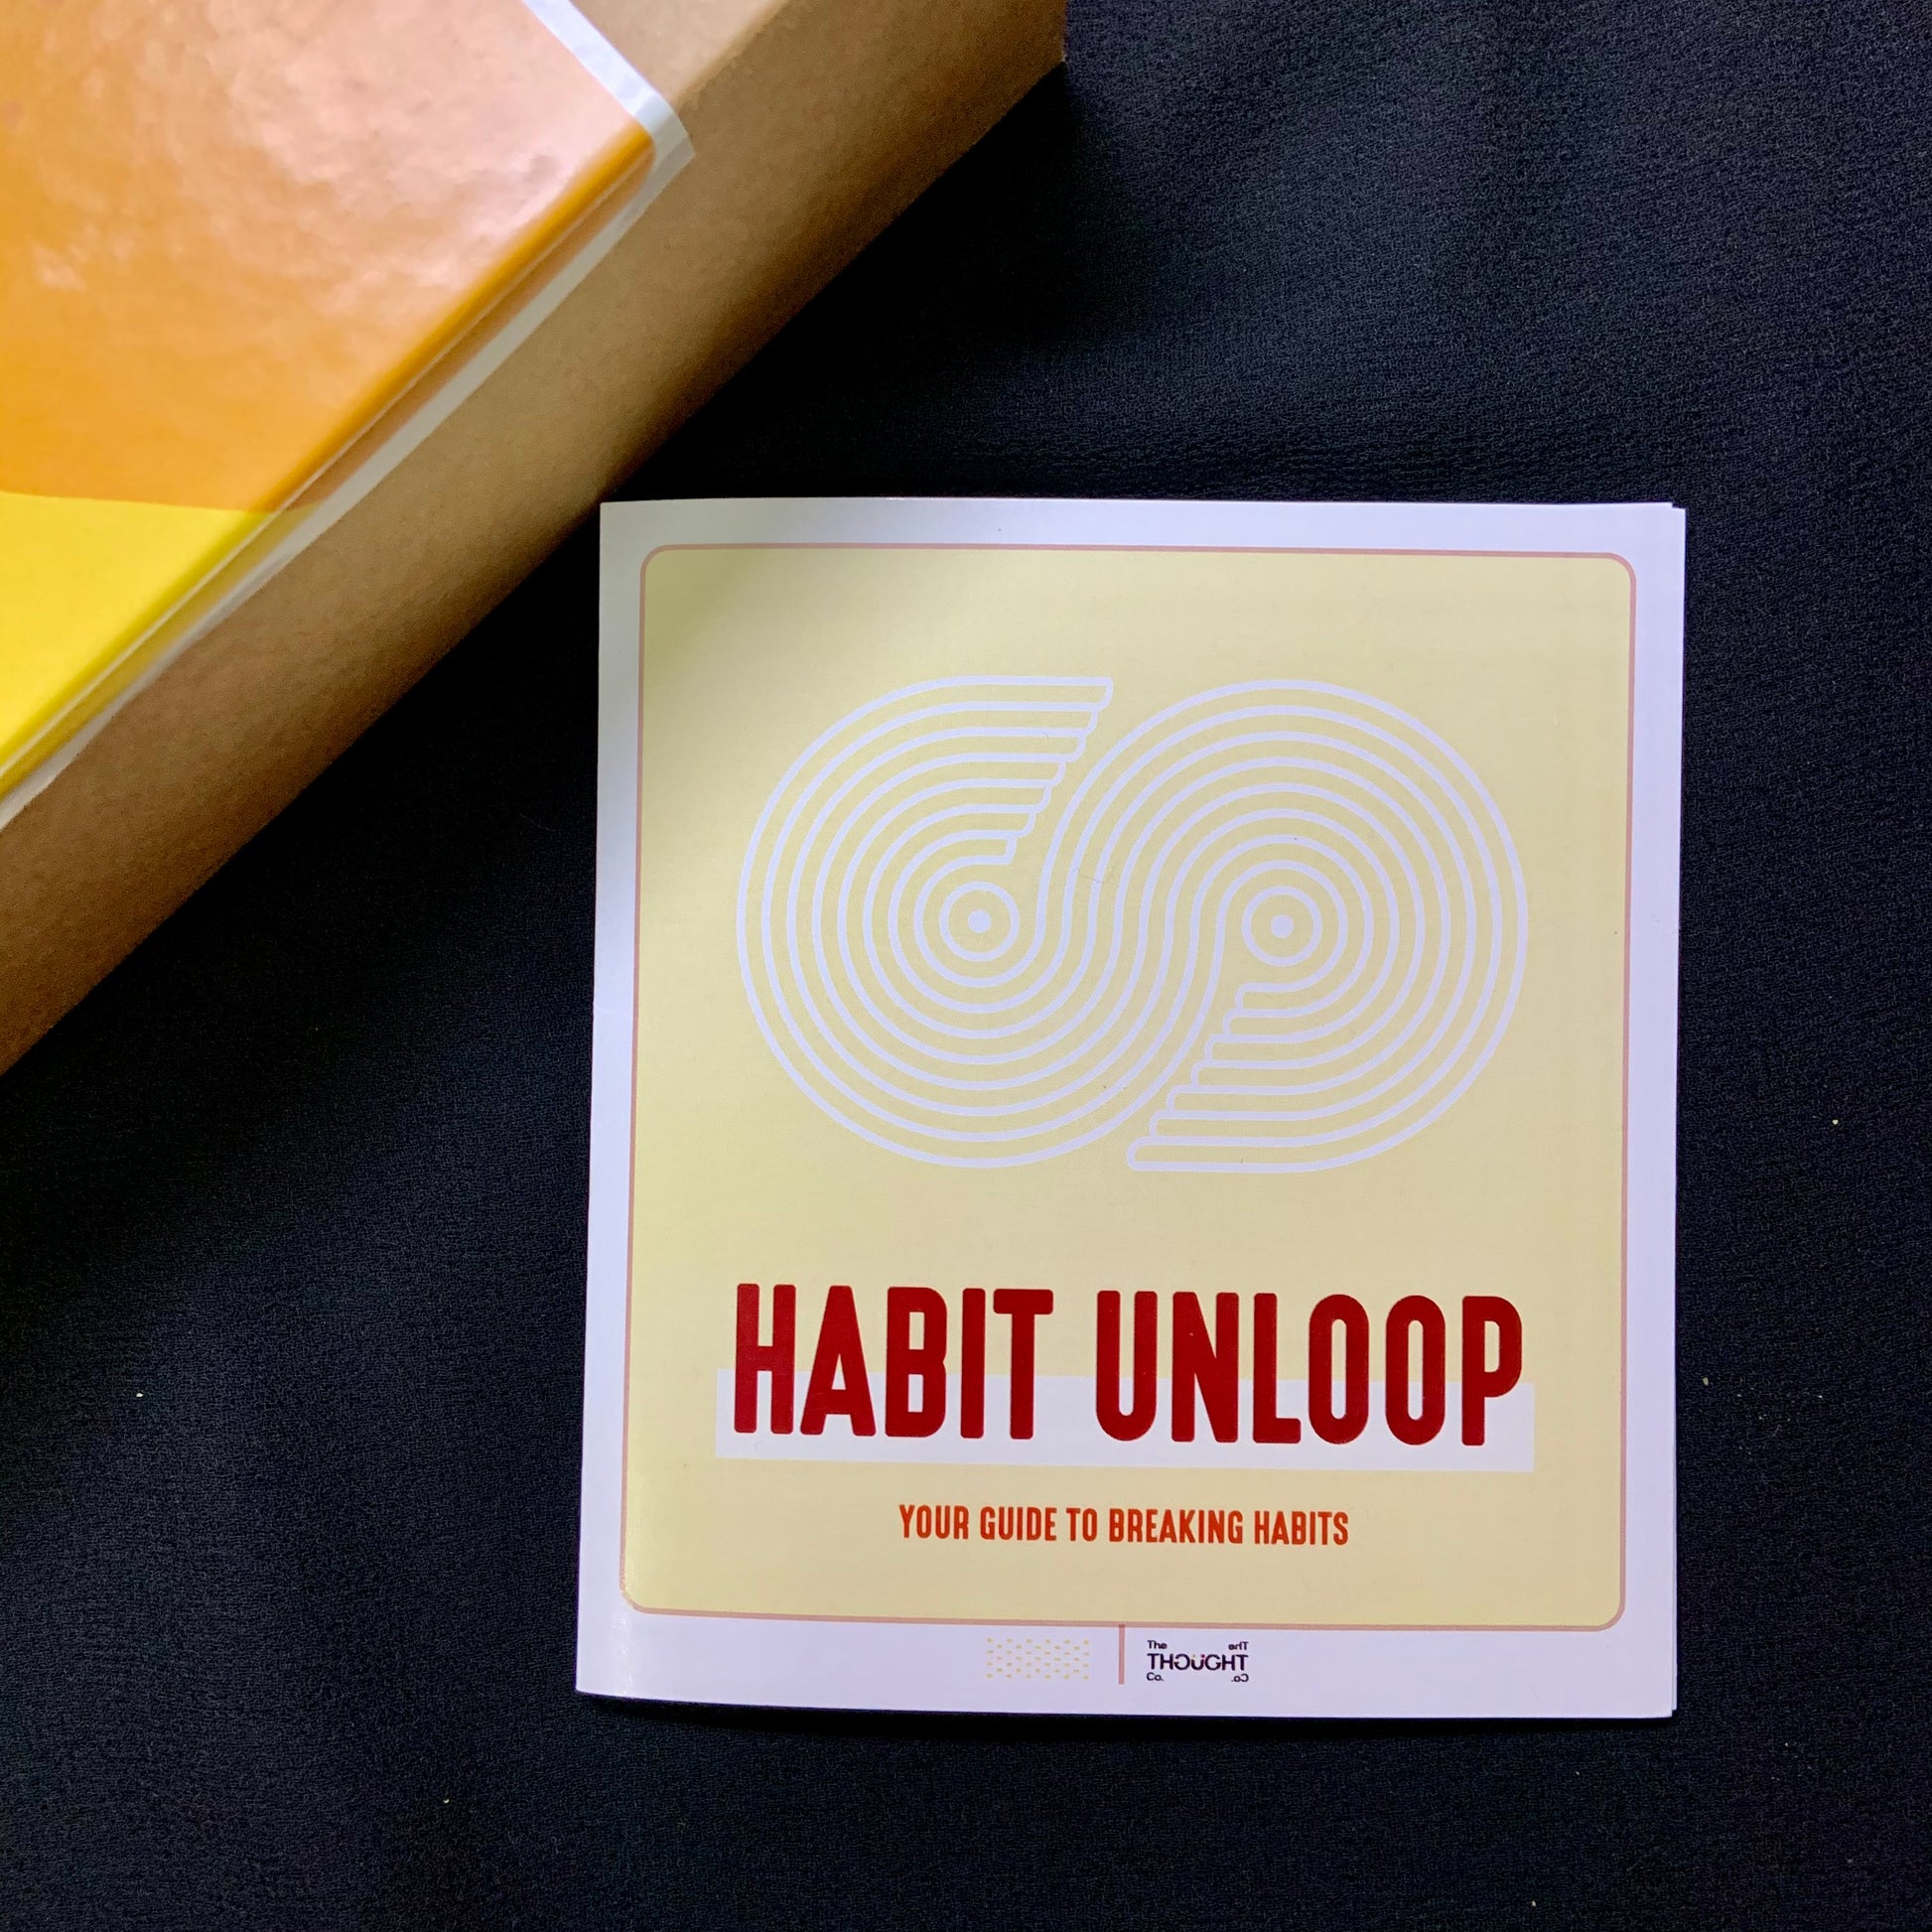 The Thought Box for Habit Formation - The Thought Co.